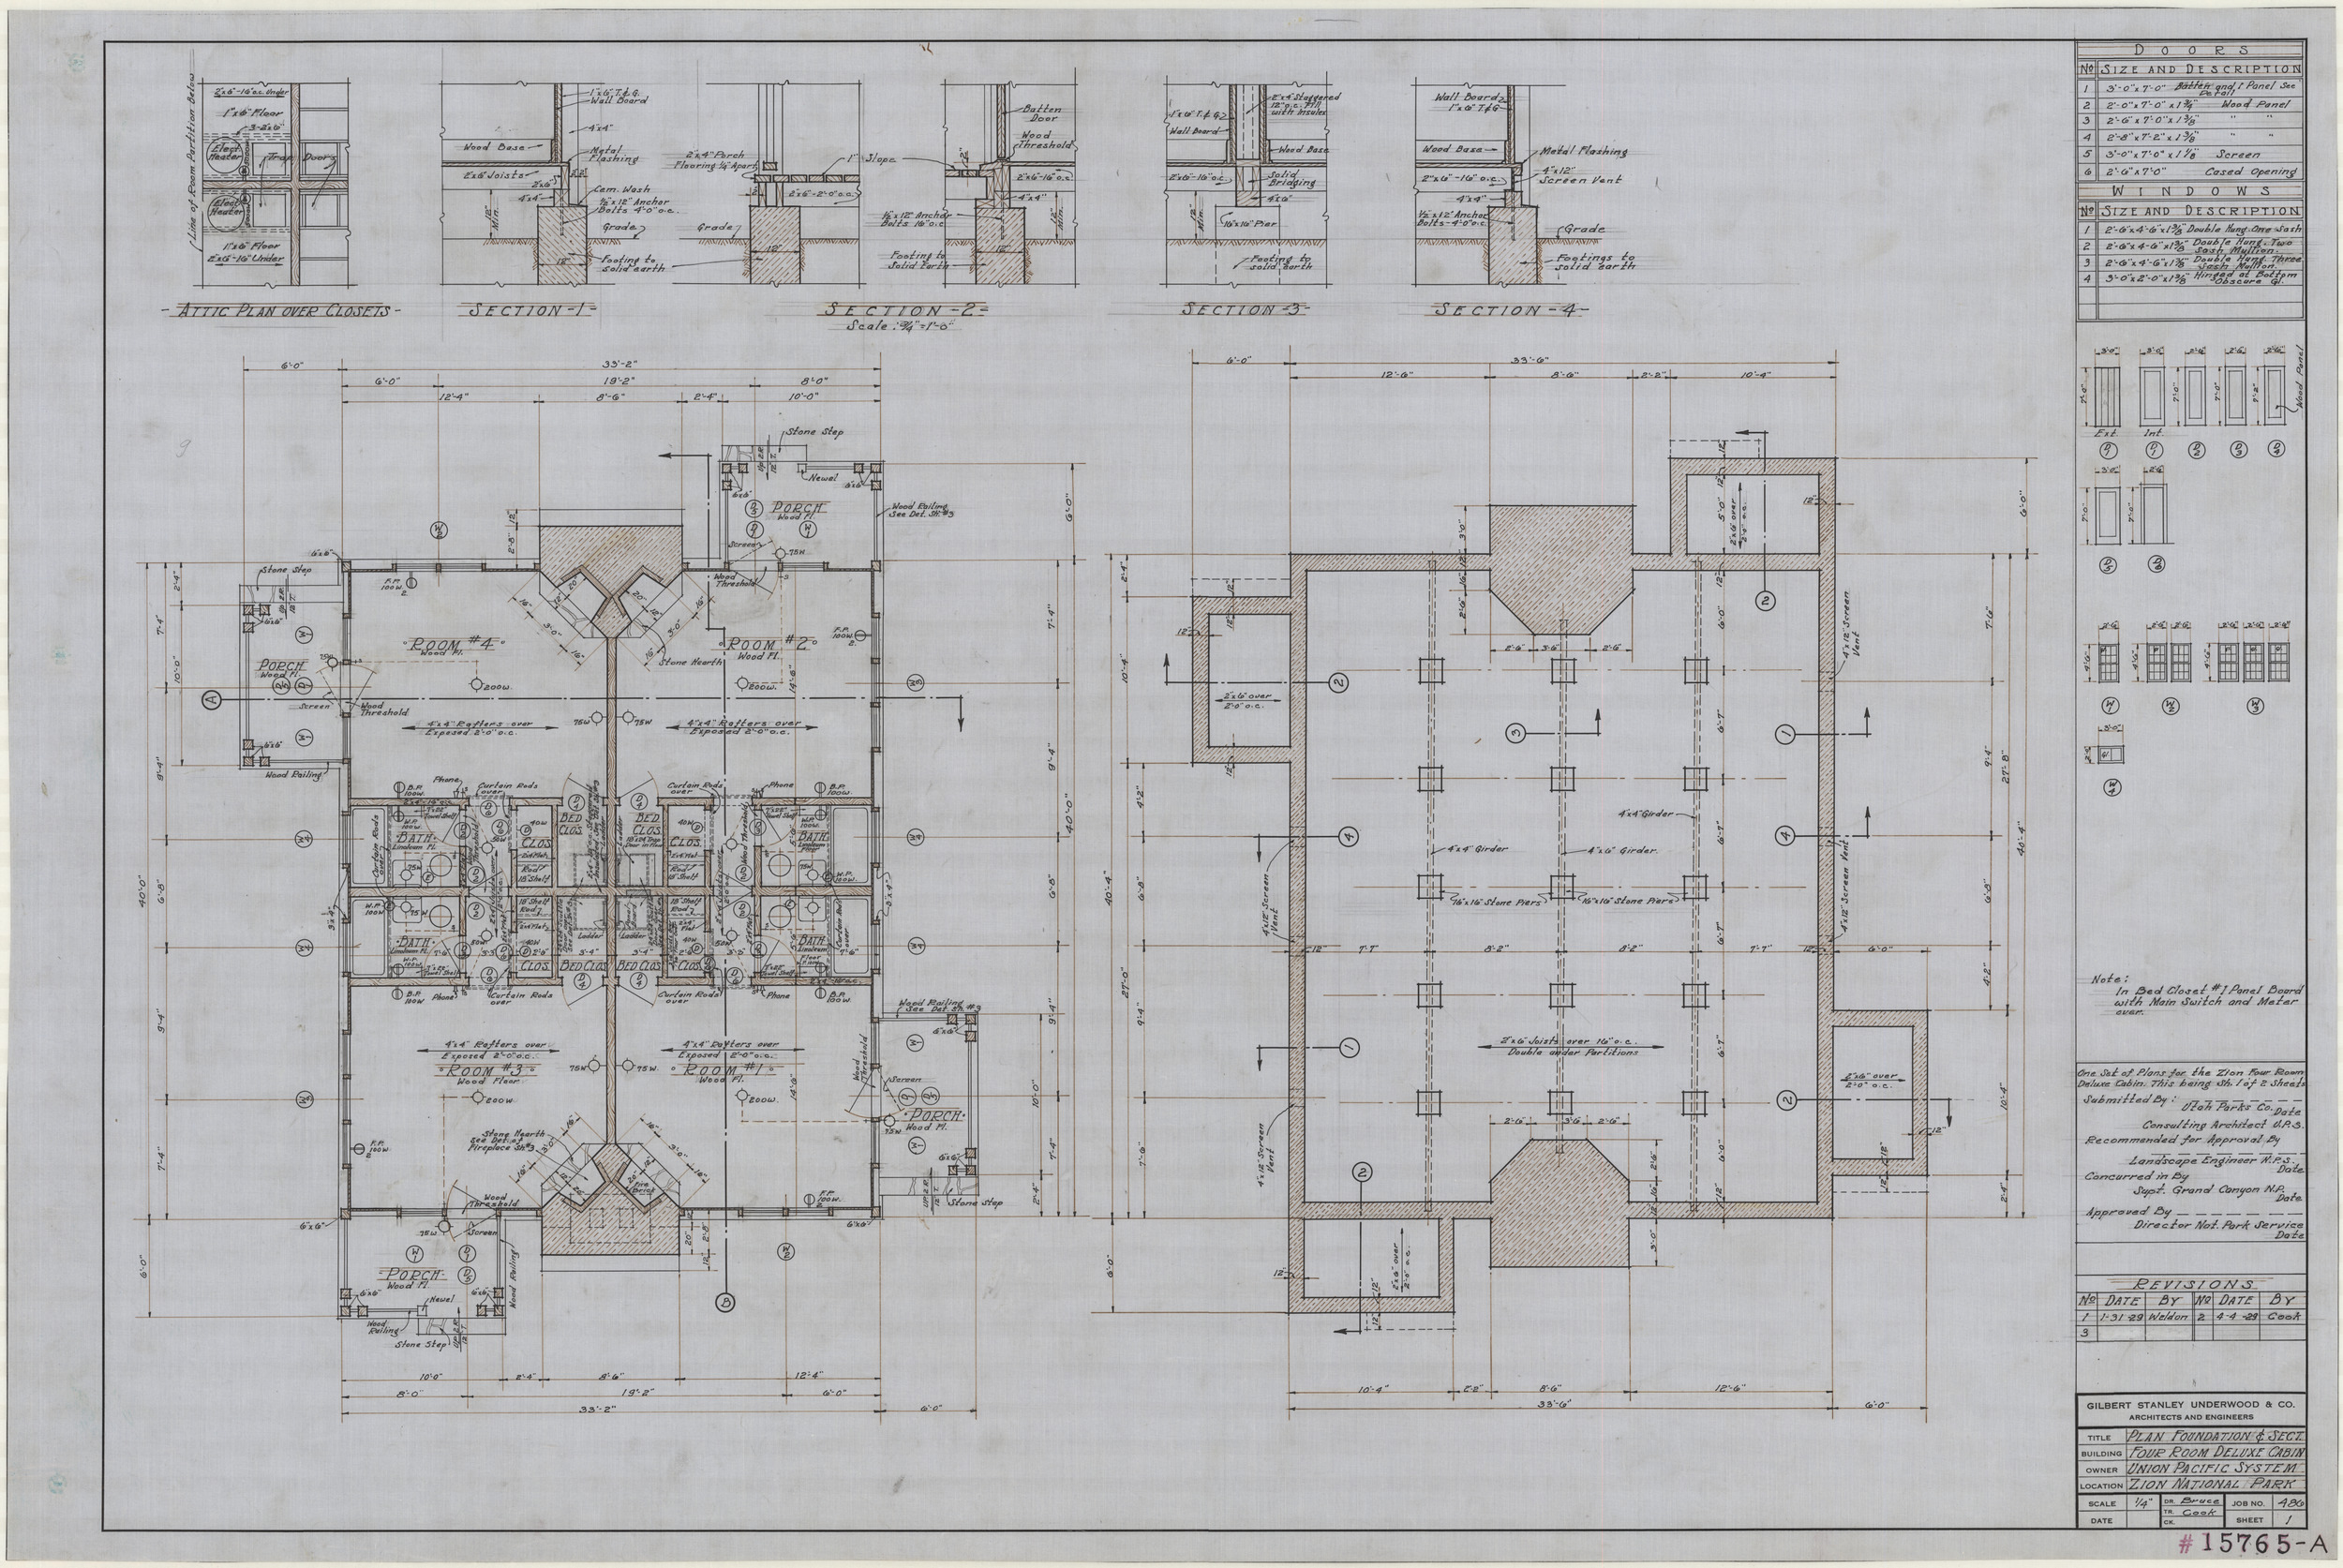 Architectural drawings of a four room deluxe cabin in  Zion National Park, foundations, sections, details, elevations, January 12, 1929, sheet 1, plan foundation and section